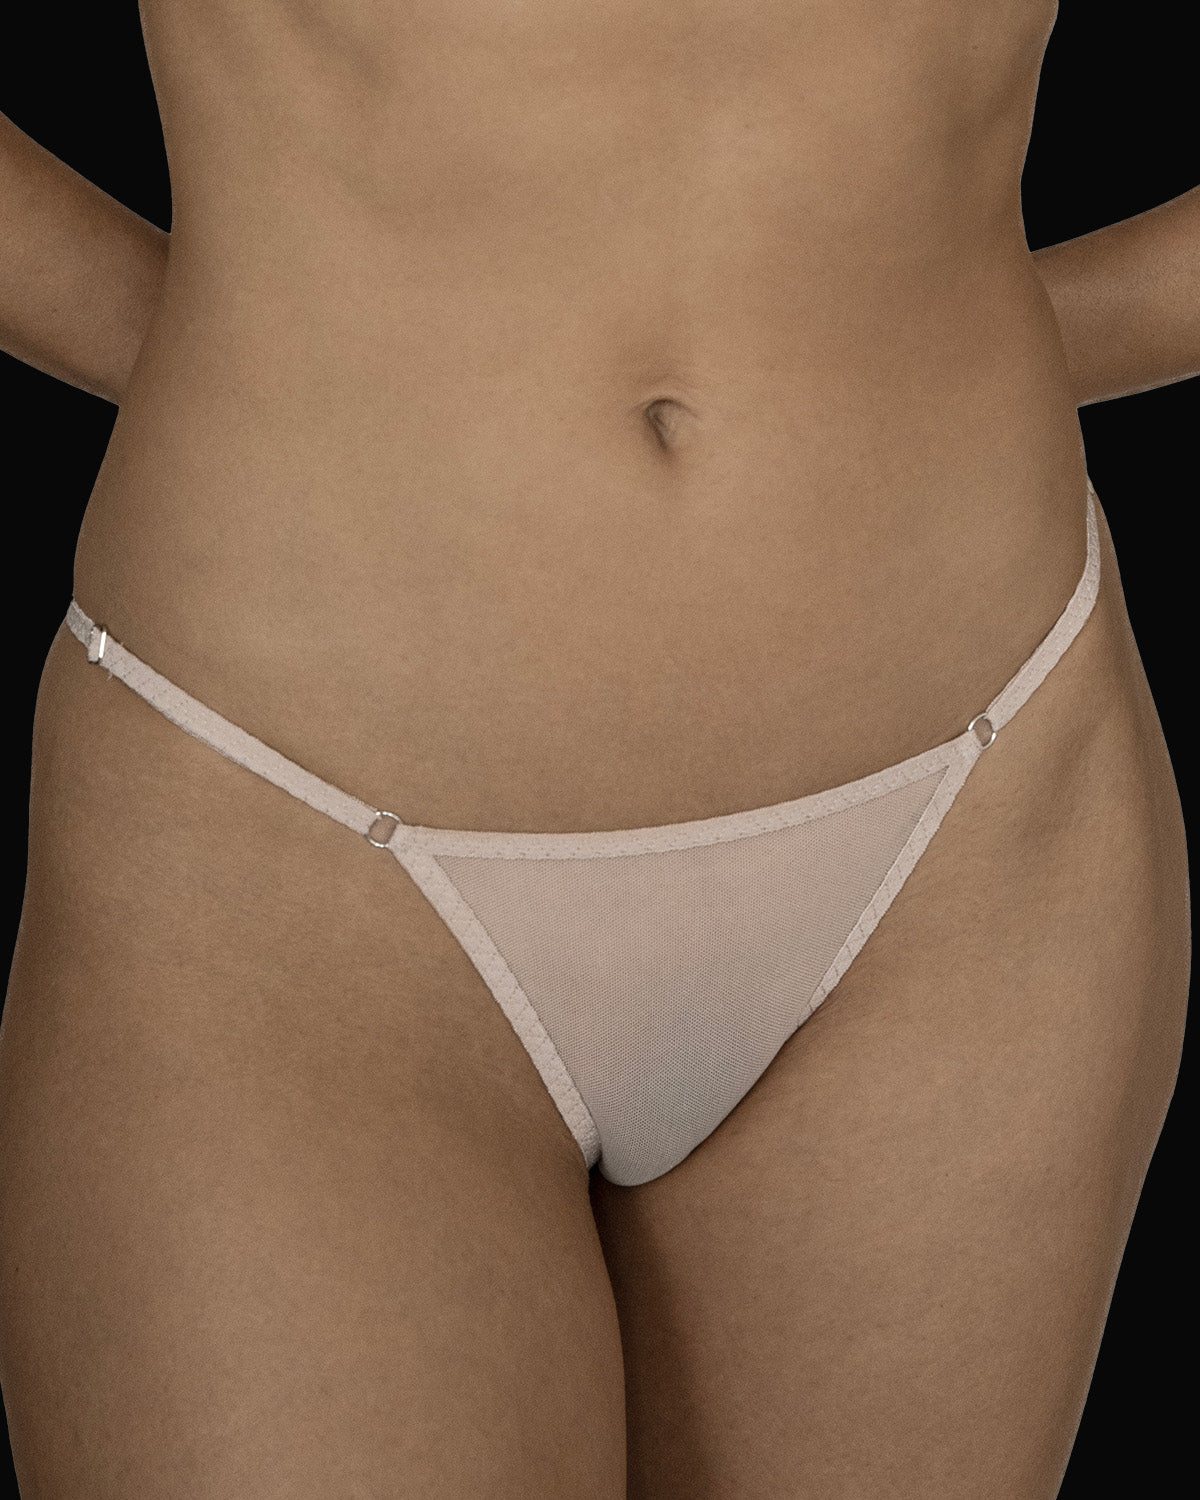 The Kye Intimates Essential String Bikini in the color ecru. A sheer pair of underwear that offers minimal front and back coverage. These delicate briefs have adjustable sliders on the waistband for ease of wear.